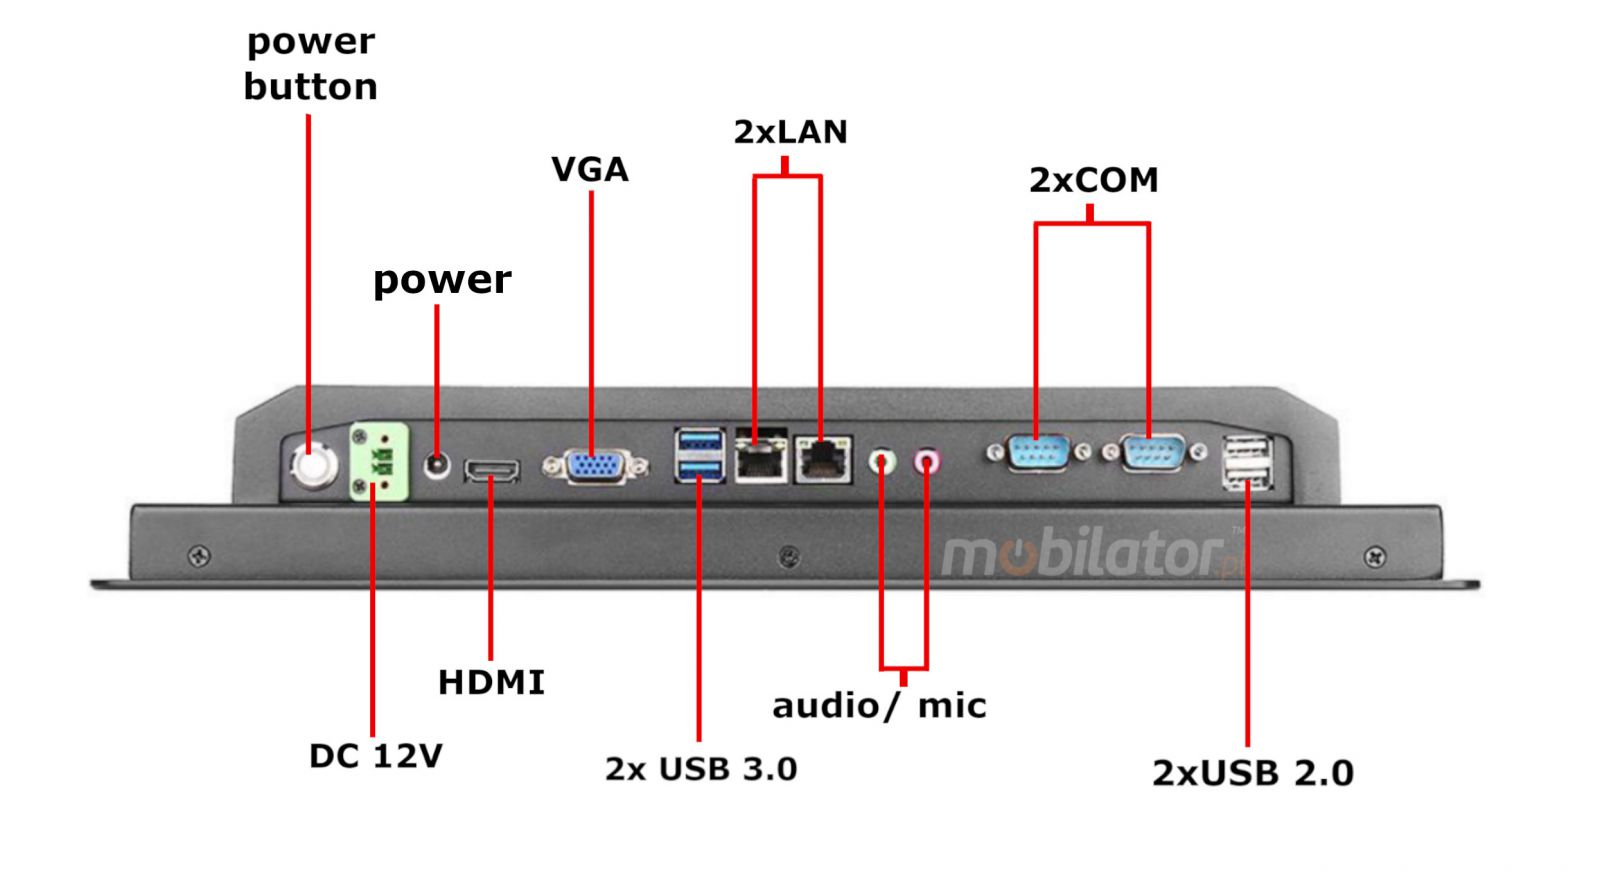 Connections in the multifunction and industrial BIBOX-170PC2